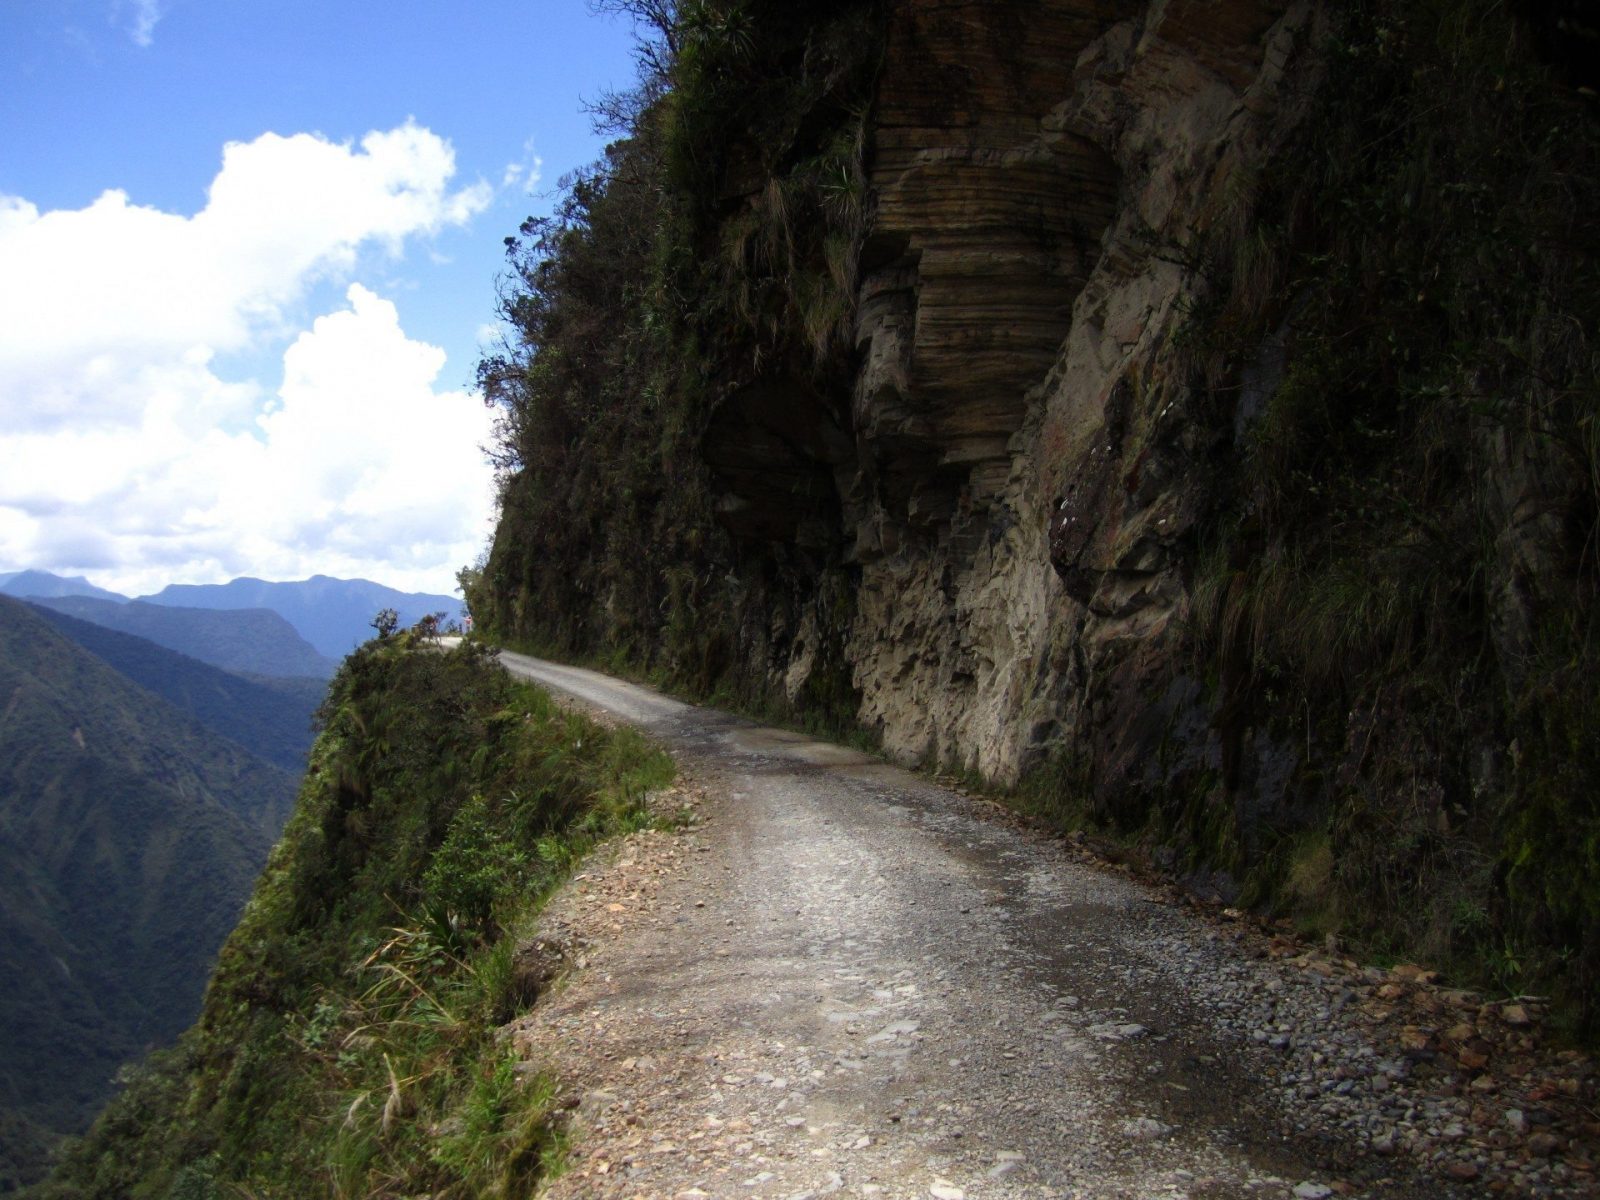 Bike trail along the infamous Bolivian Death Road.